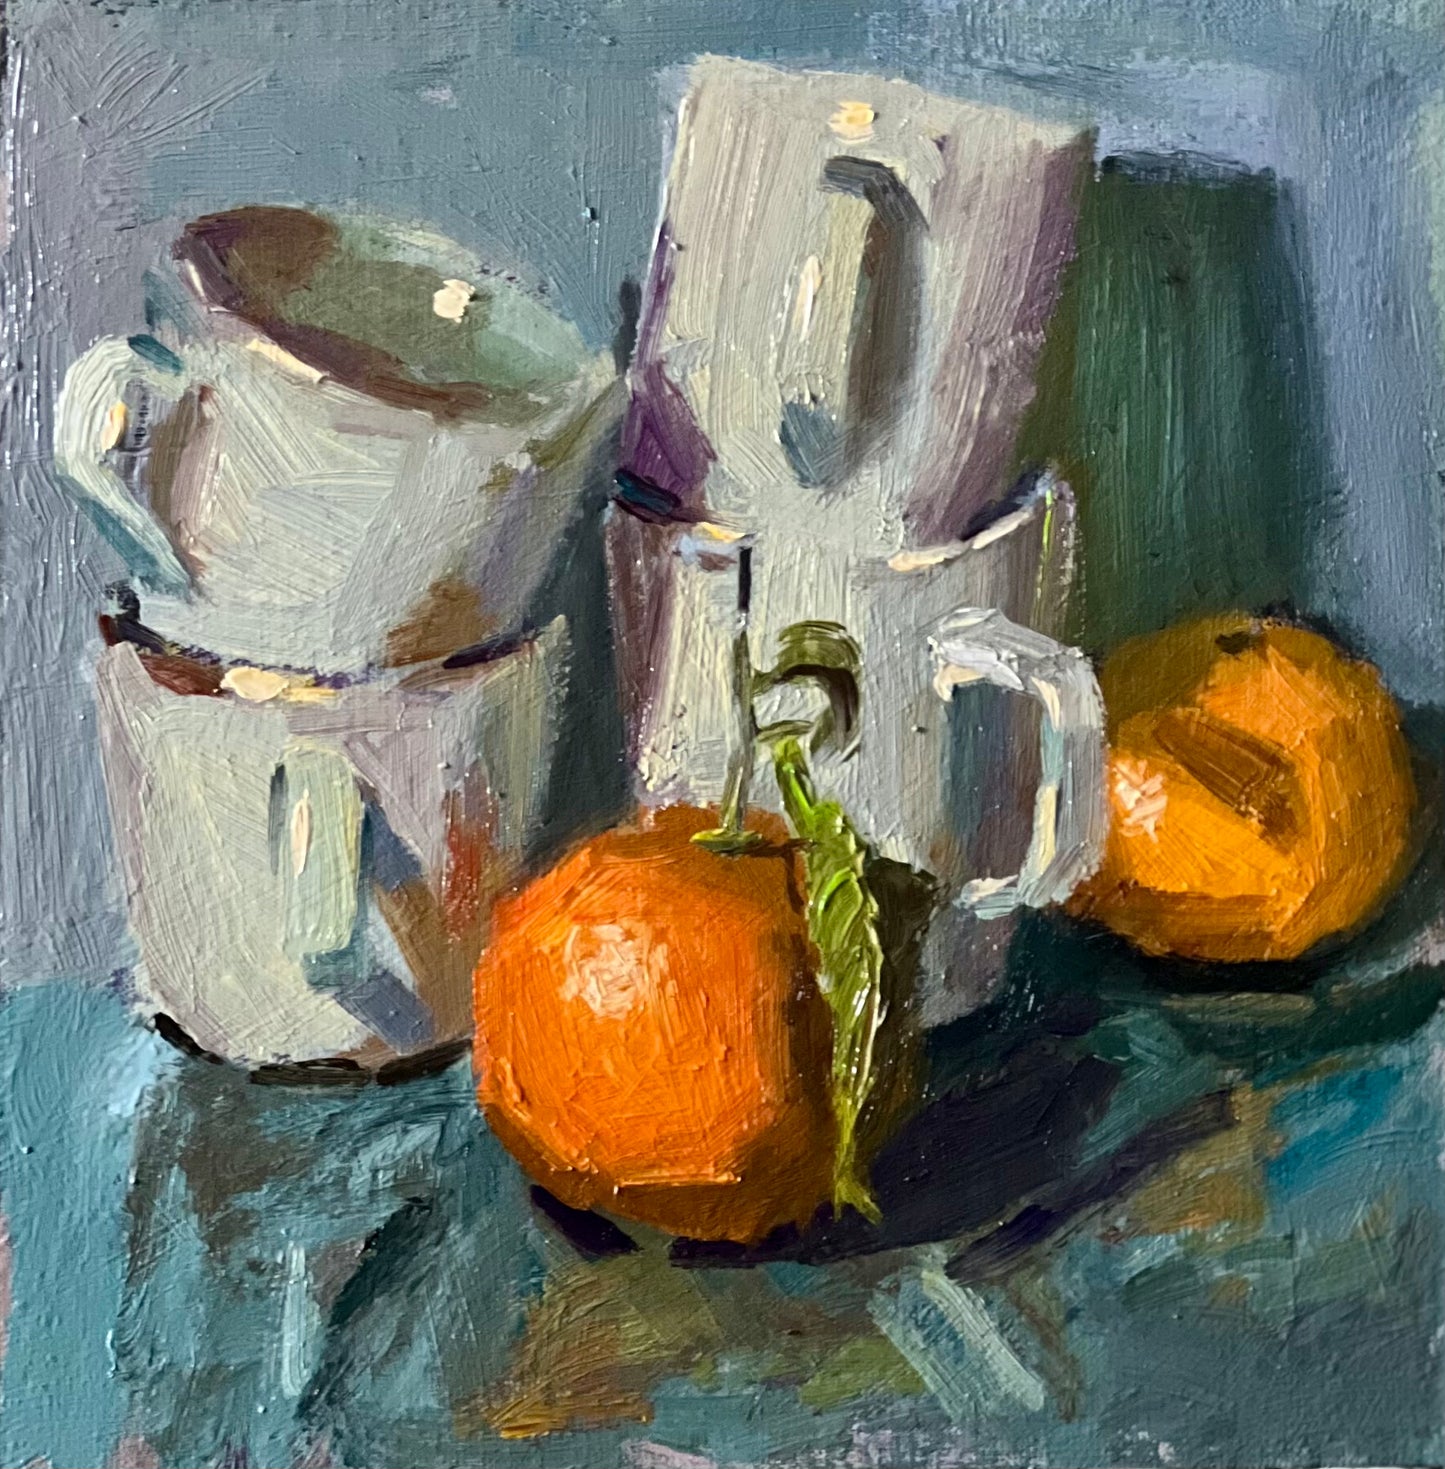 Oranges and Cups on Blue! - Still Life Oil Painting